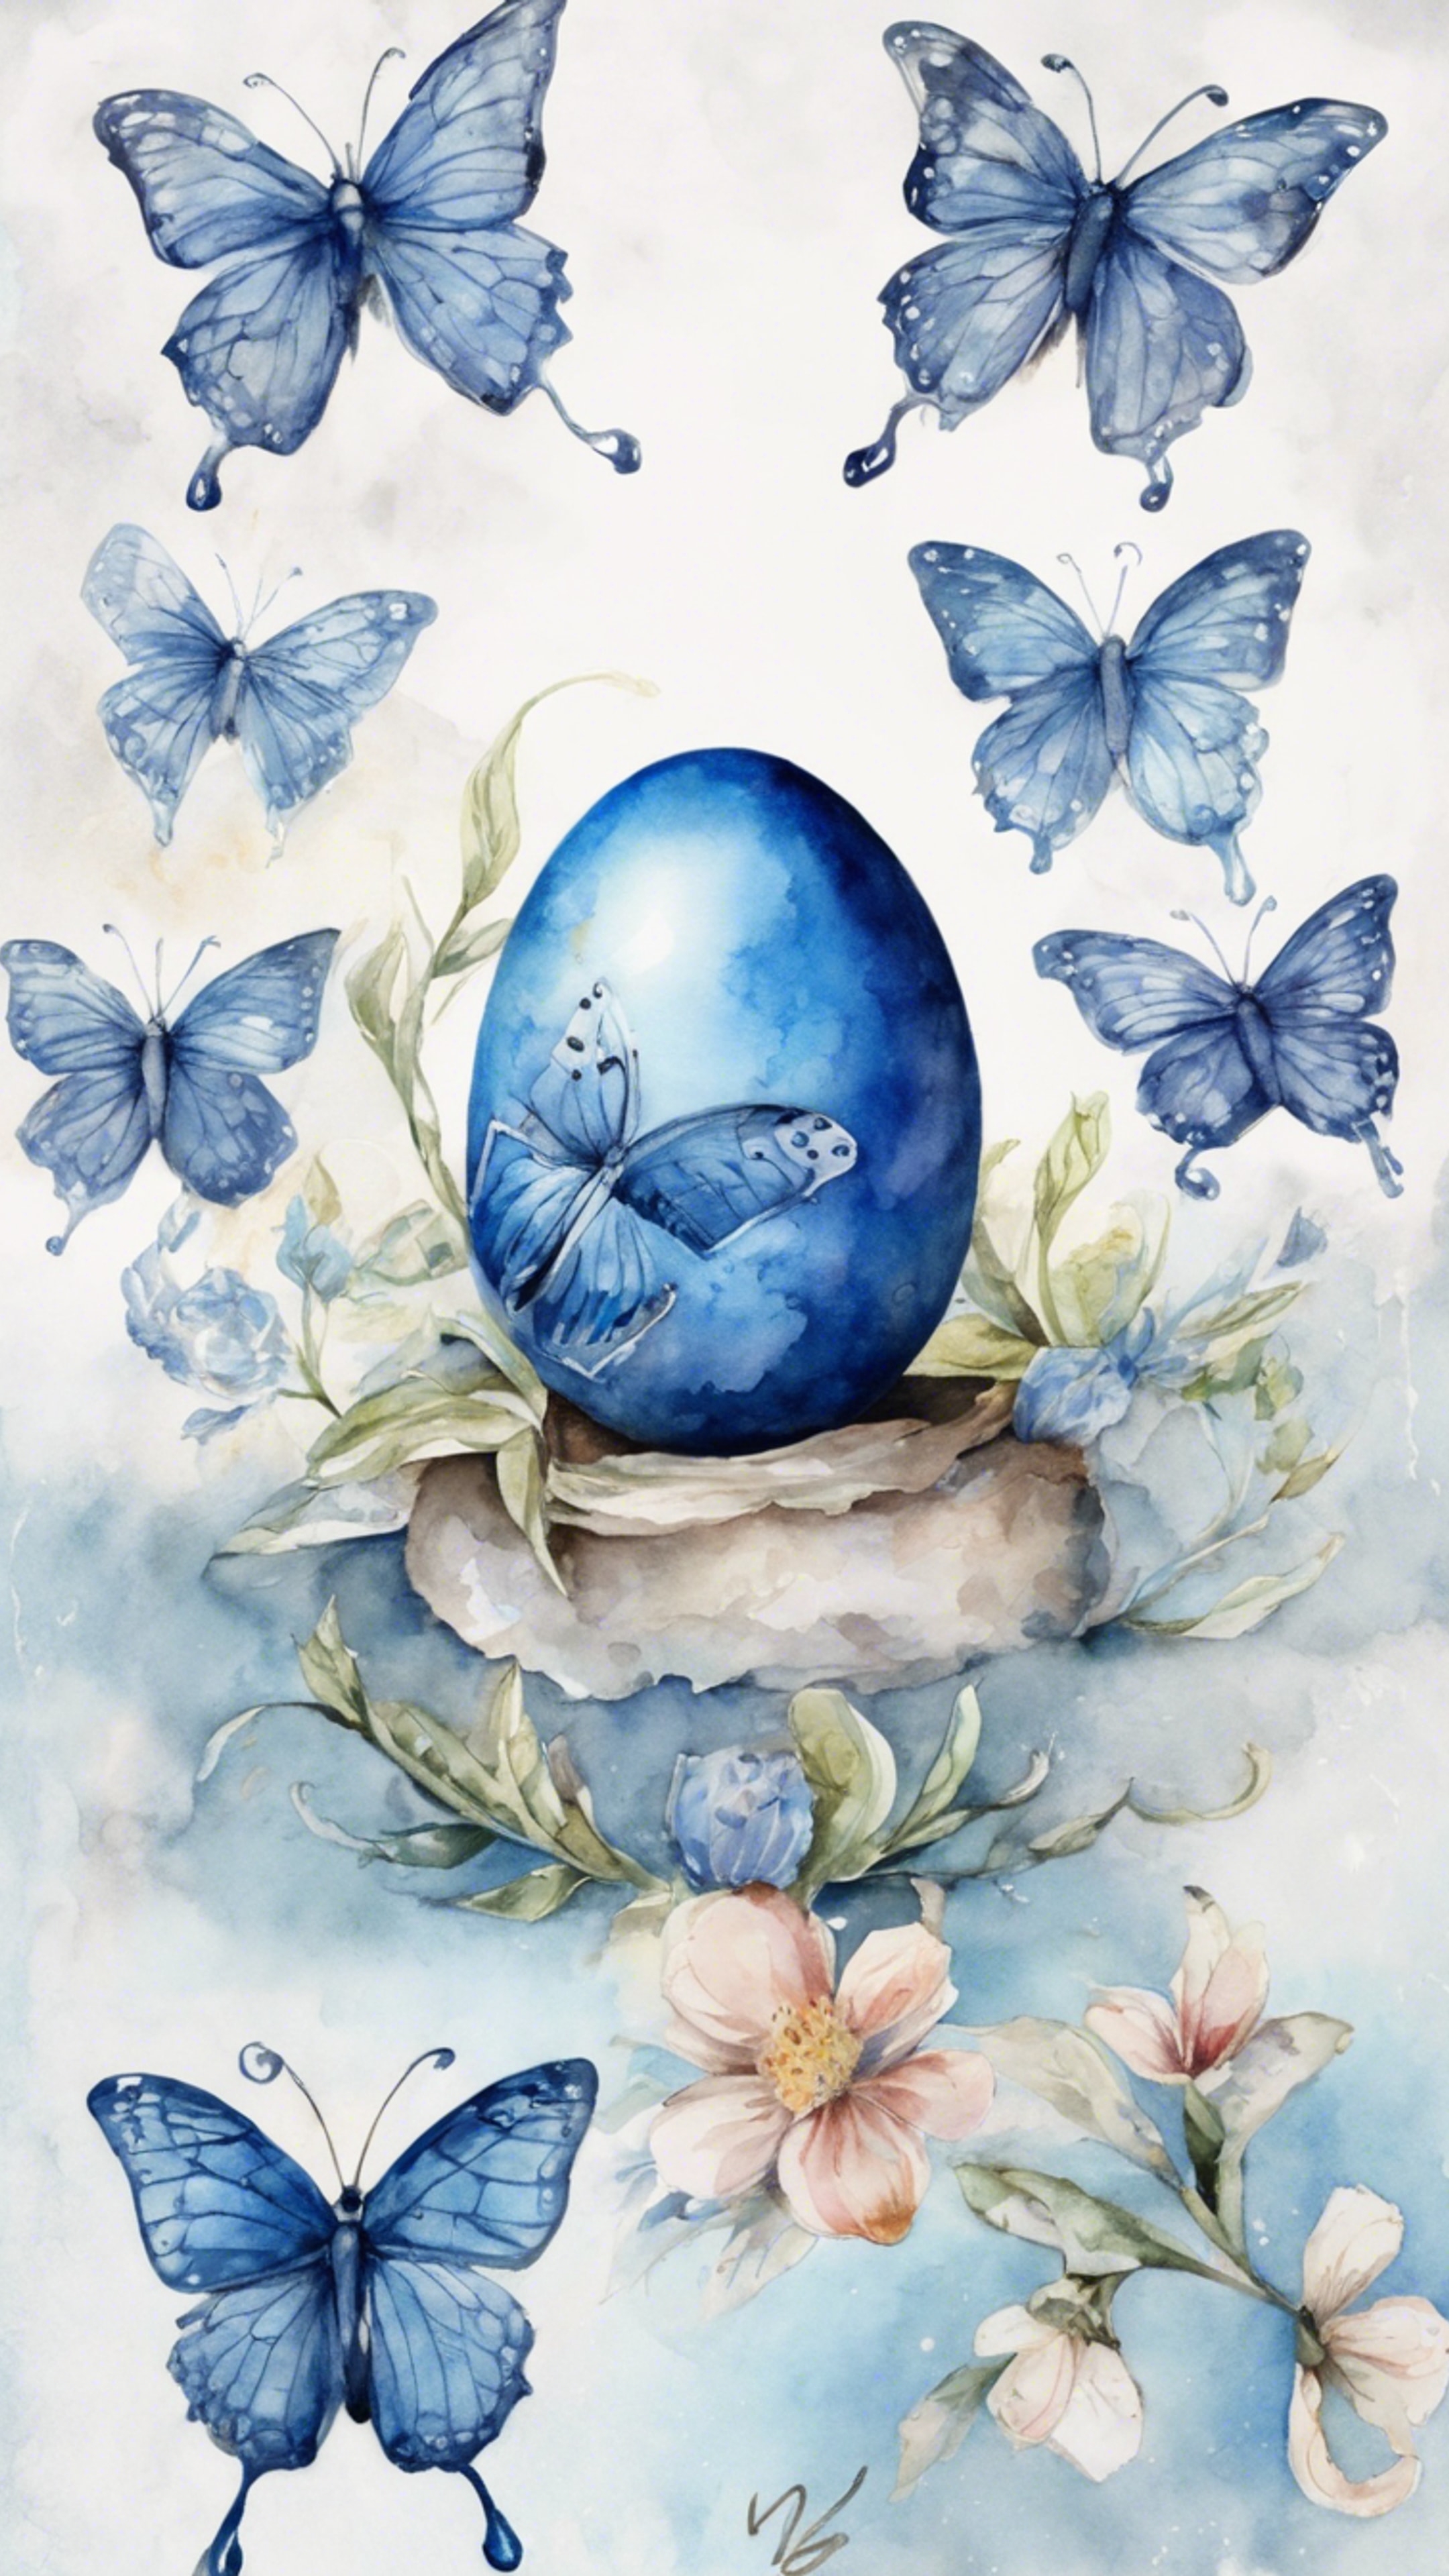 Hand-drawn watercolor painting of a blue Easter egg decorated with butterfly motifs.壁紙[3cd14c9d9f9c4dfea1fc]